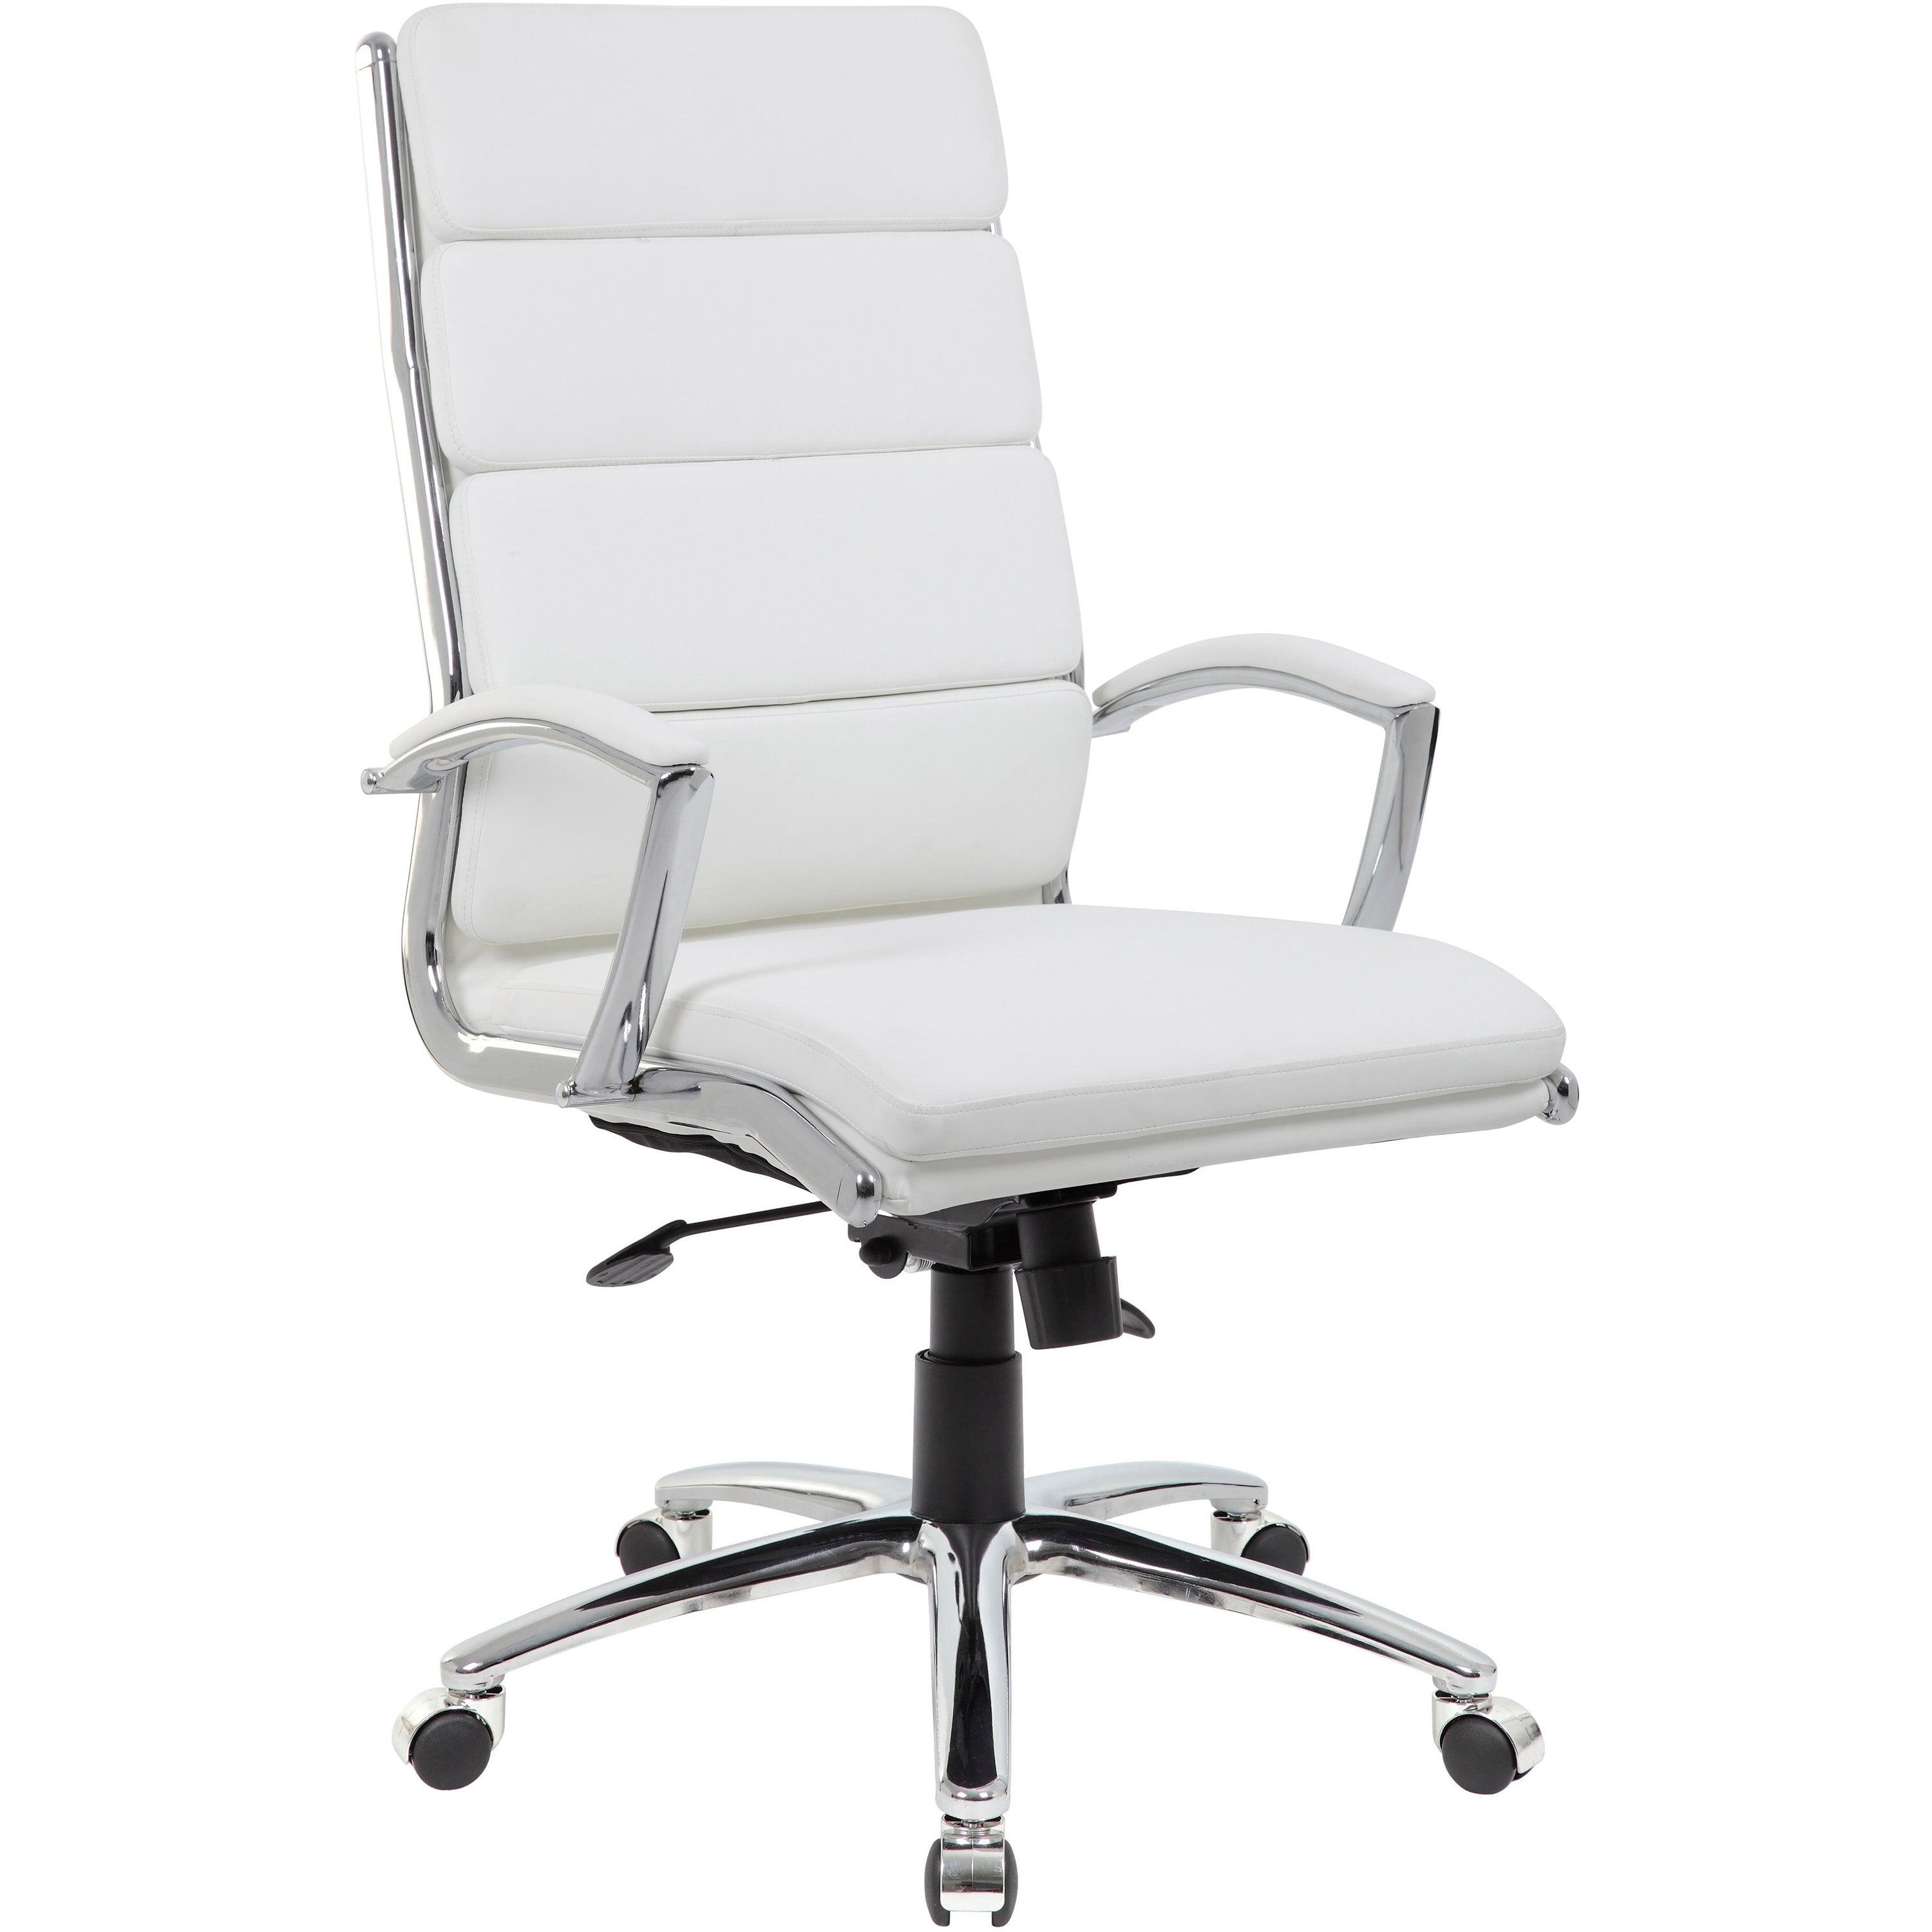 Executive CaressoftPlus Chair with Metal Chrome Finish, B9471-WT